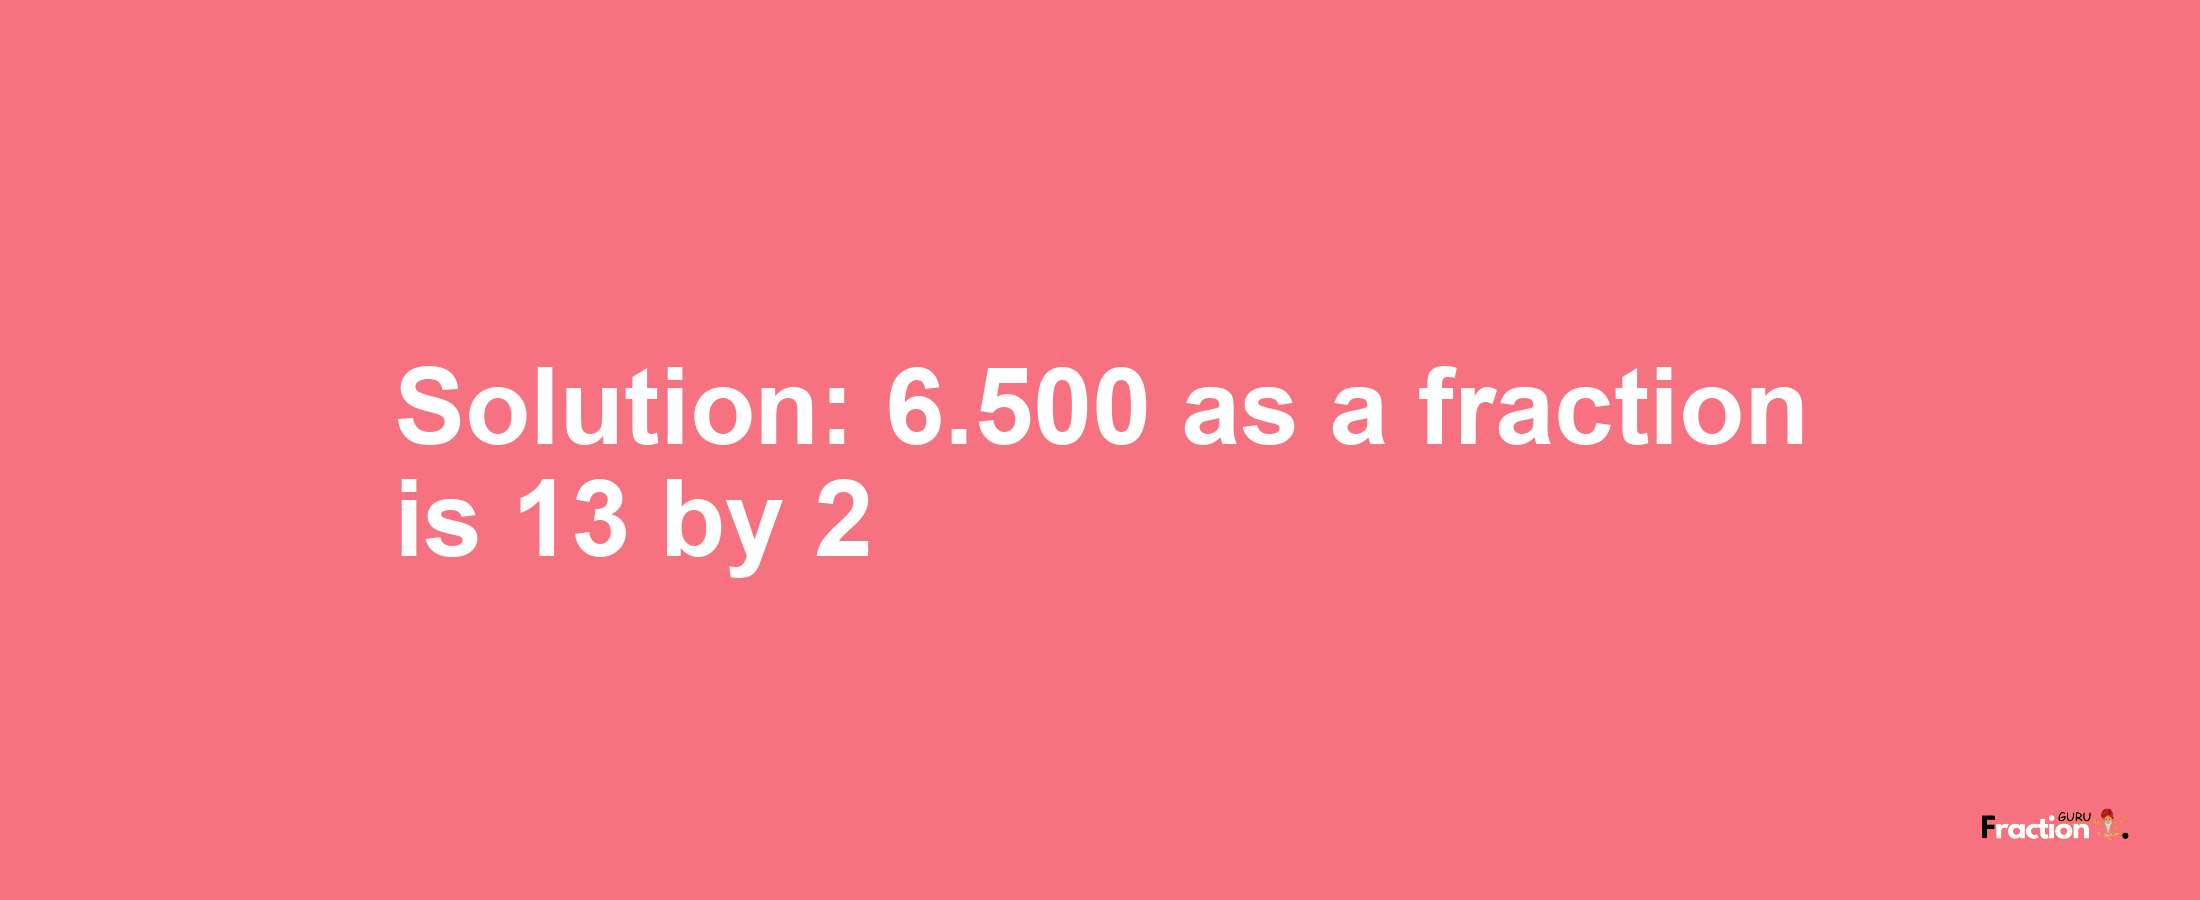 Solution:6.500 as a fraction is 13/2